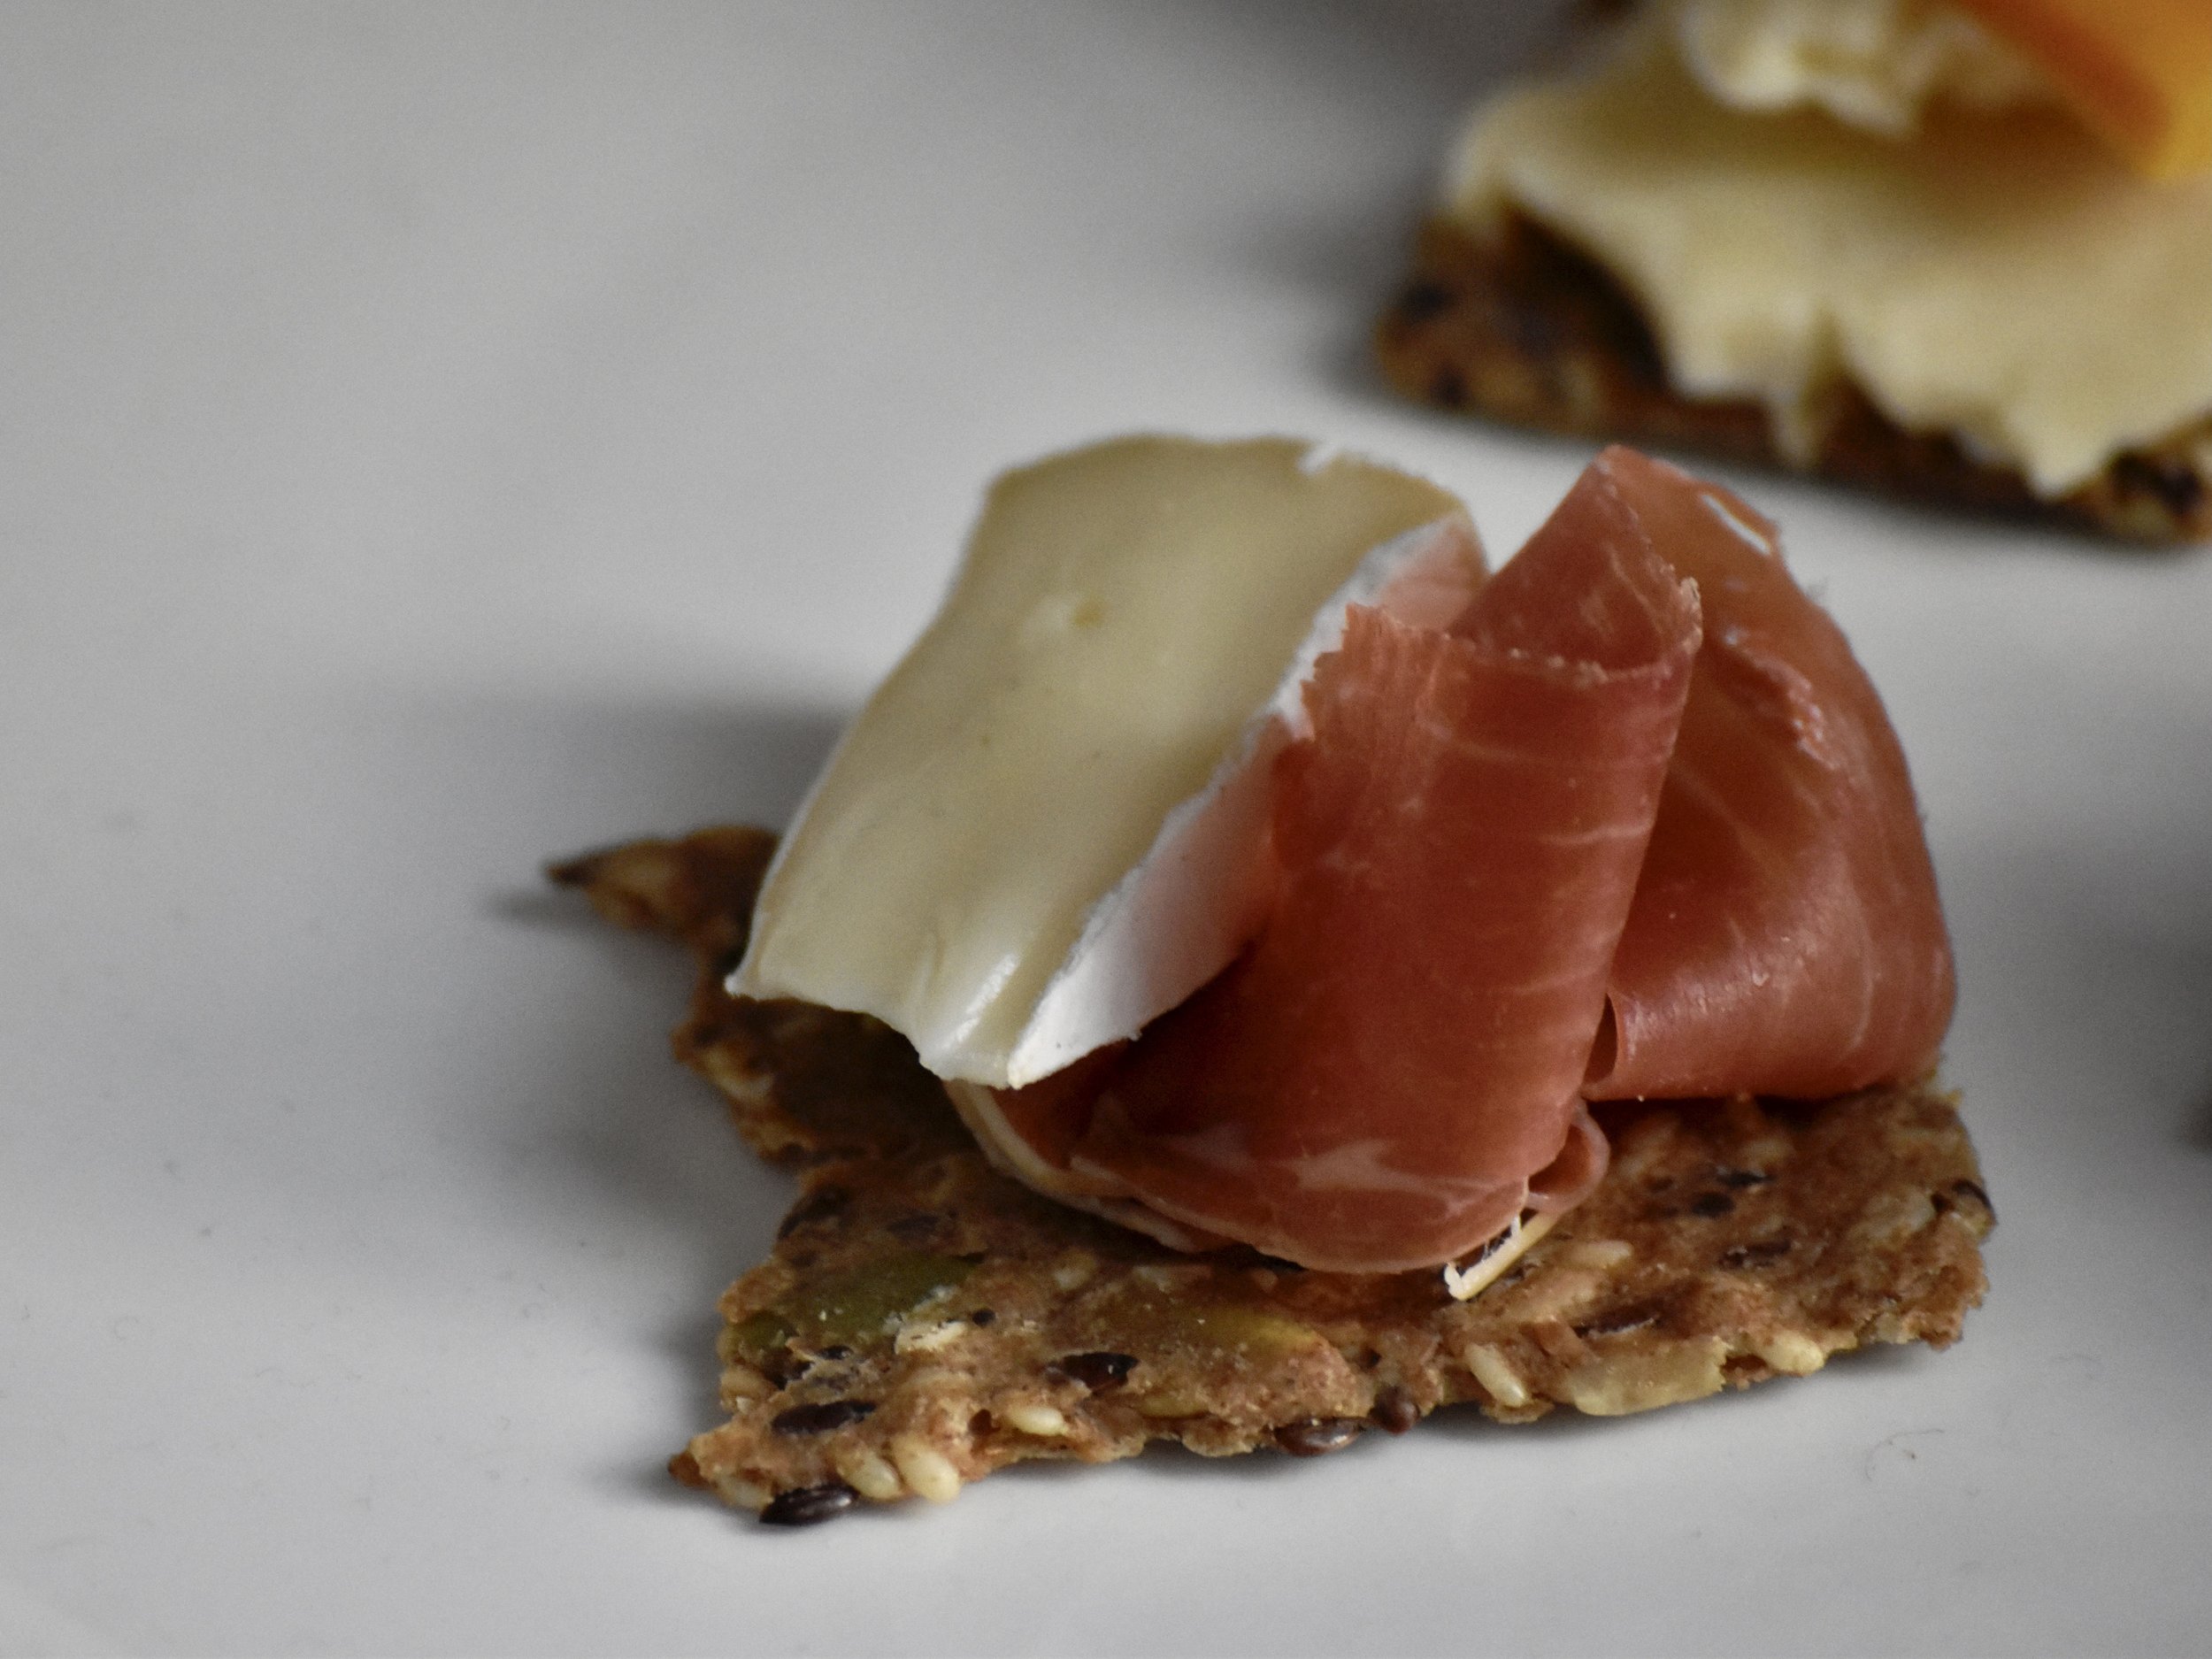  A perfect bite of Little Hosmer on a cracker with proscuitto  